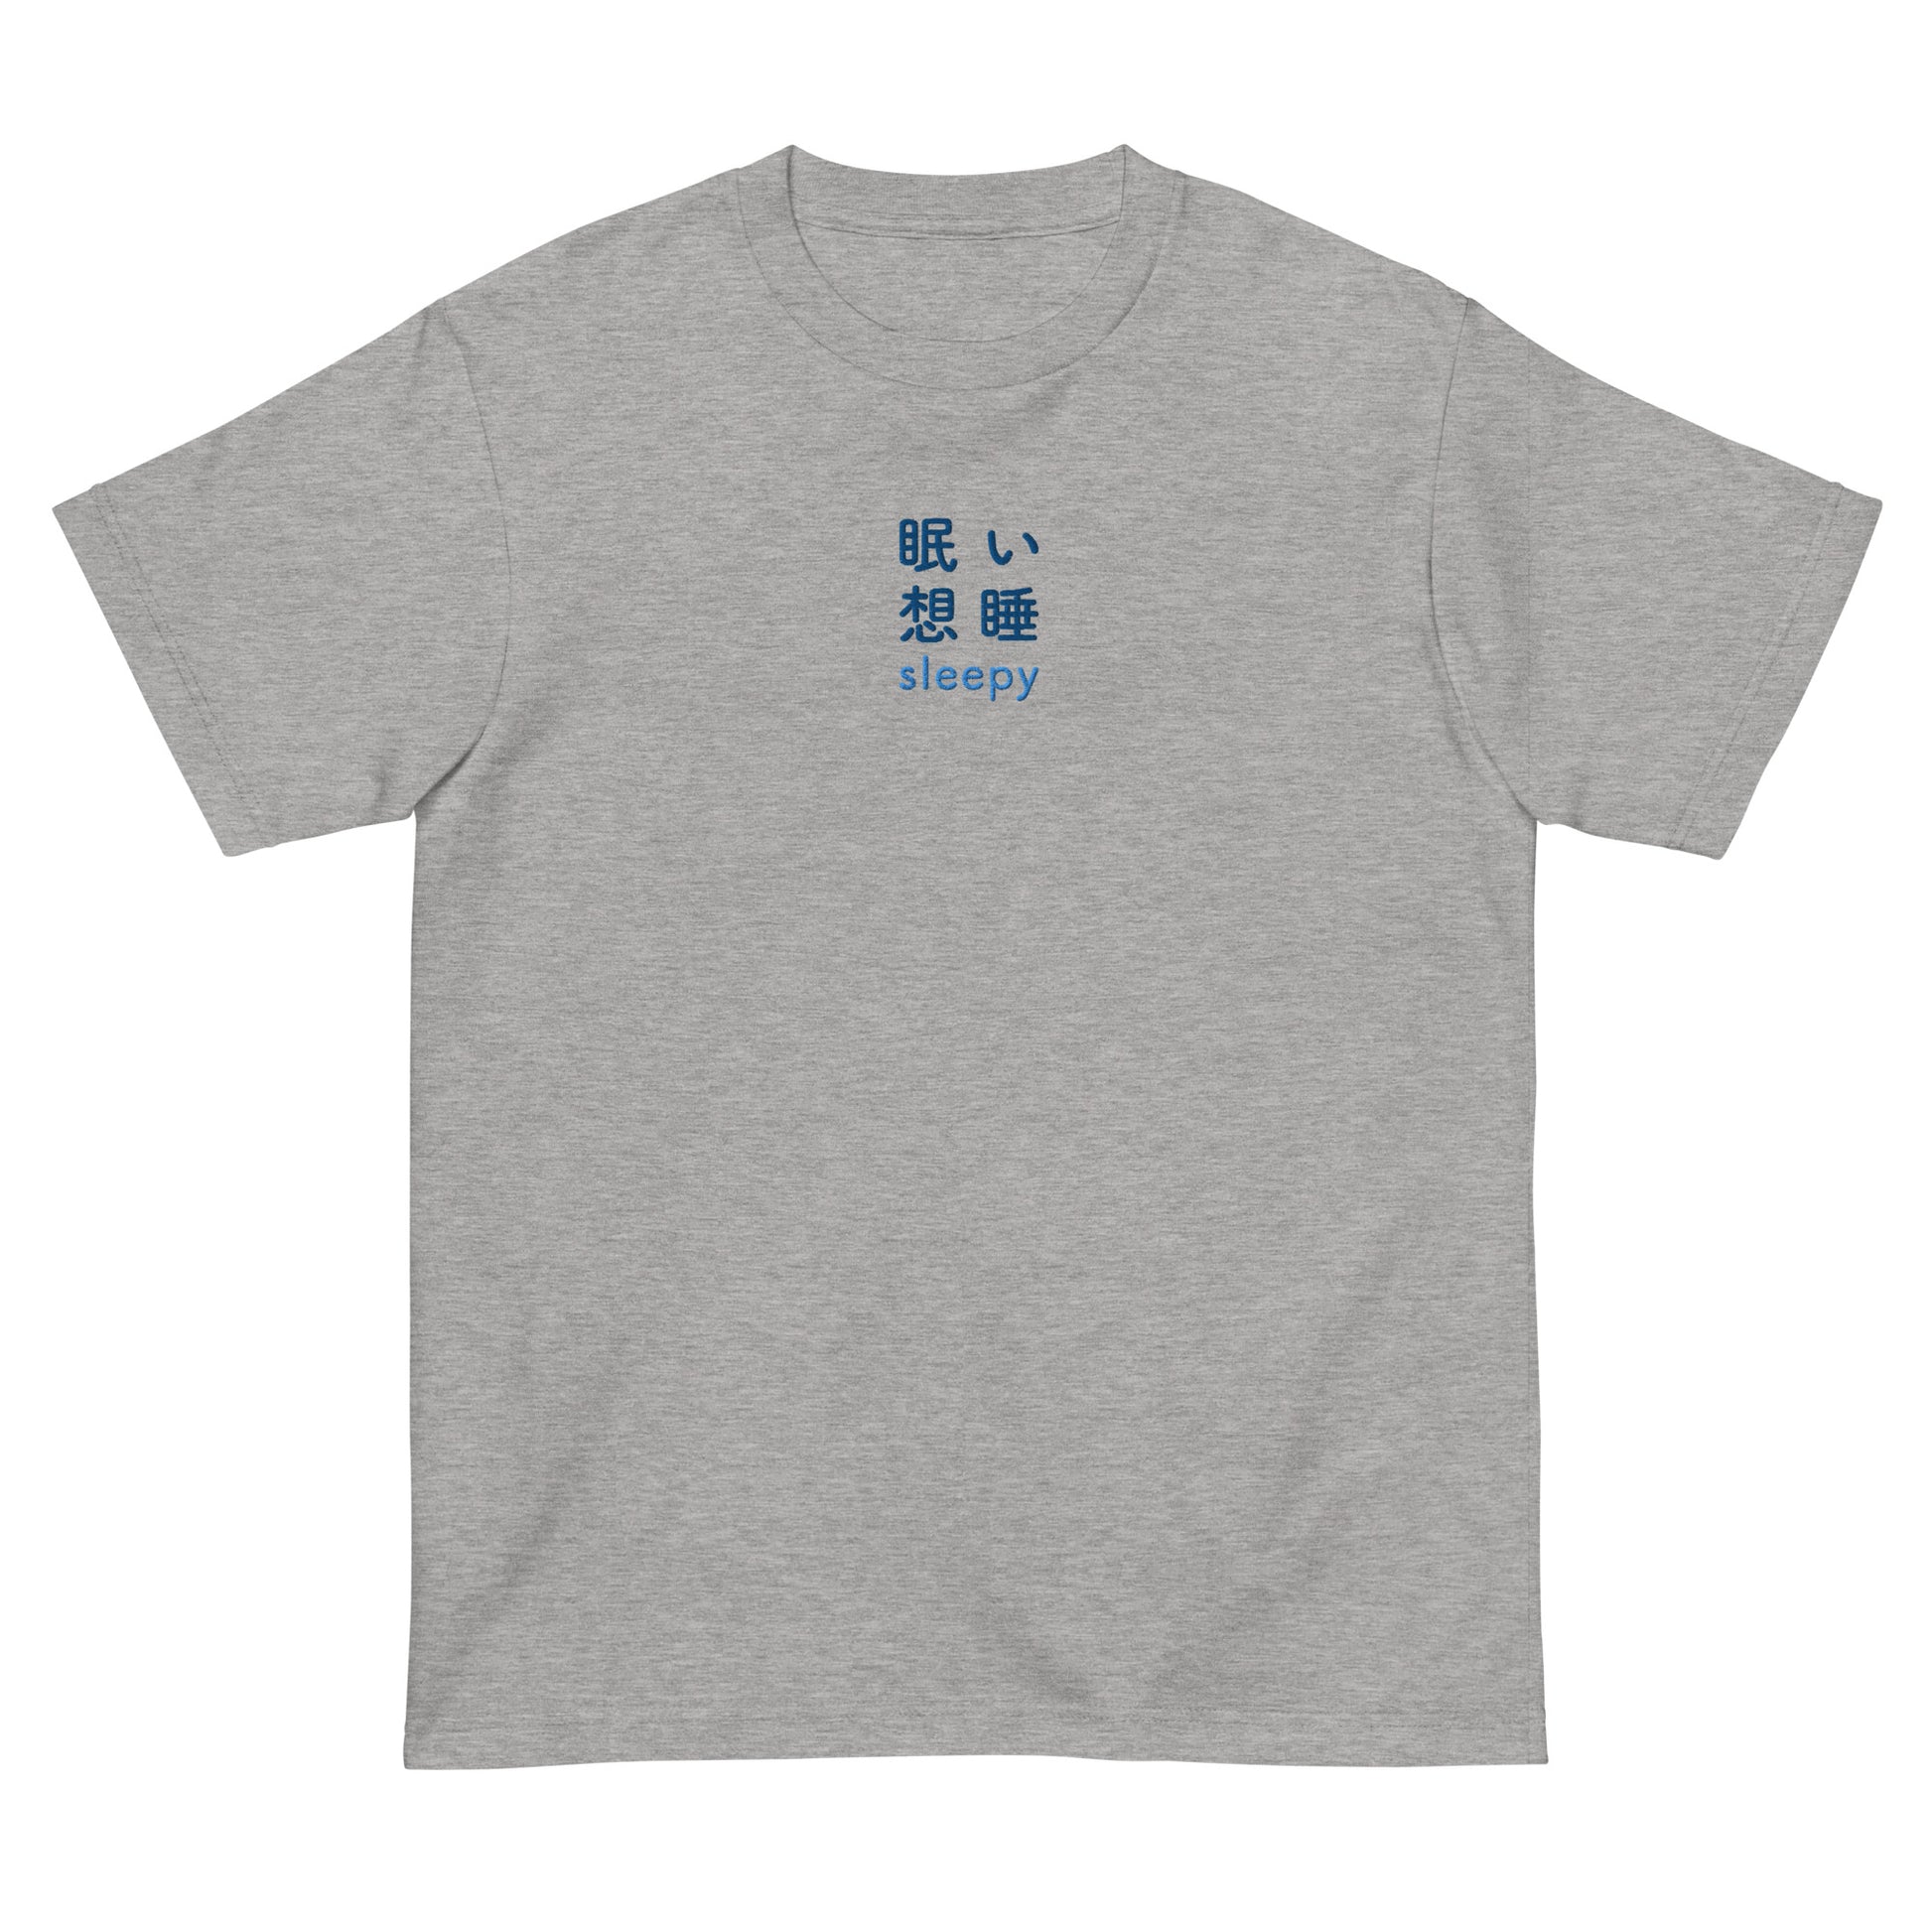 Light Blue High Quality Tee - Front Design with an Blue Embroidery "Sleepy" in Japanese,Chinese and English